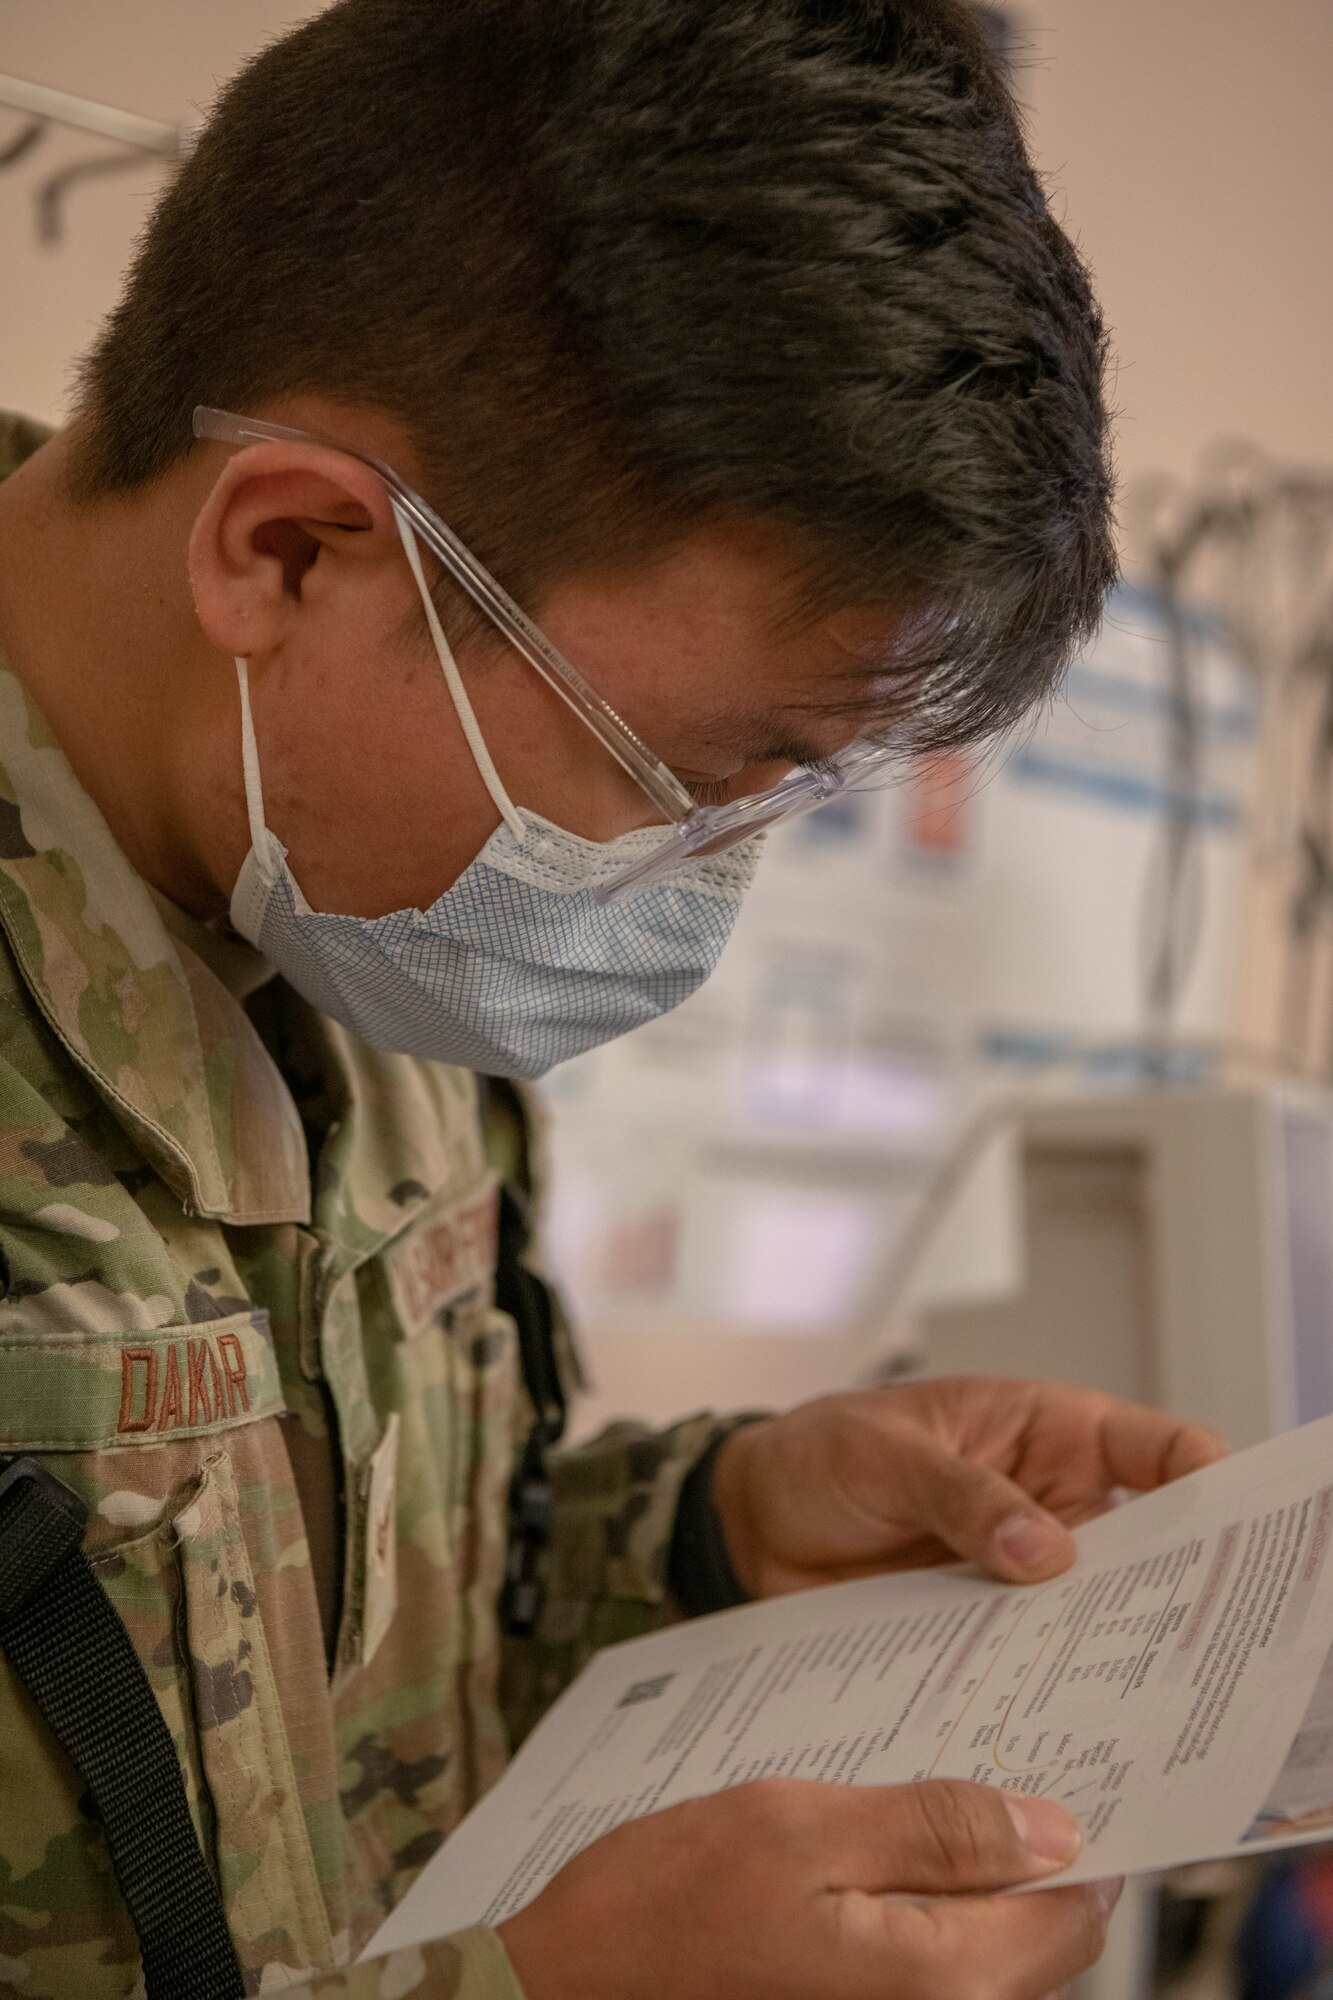 Senior Airman Tenzin Dakar, 104th Medical Group aerospace medical technician. looks over a spreadsheet during a training exercise at Tripler Army Medical Center, Hawaii, April 28, 2022. Dakar is at Tripler to provide medical support and complete training requirements. (U.S. Air National Guard photo by 1Lt. Amelia Leonard)